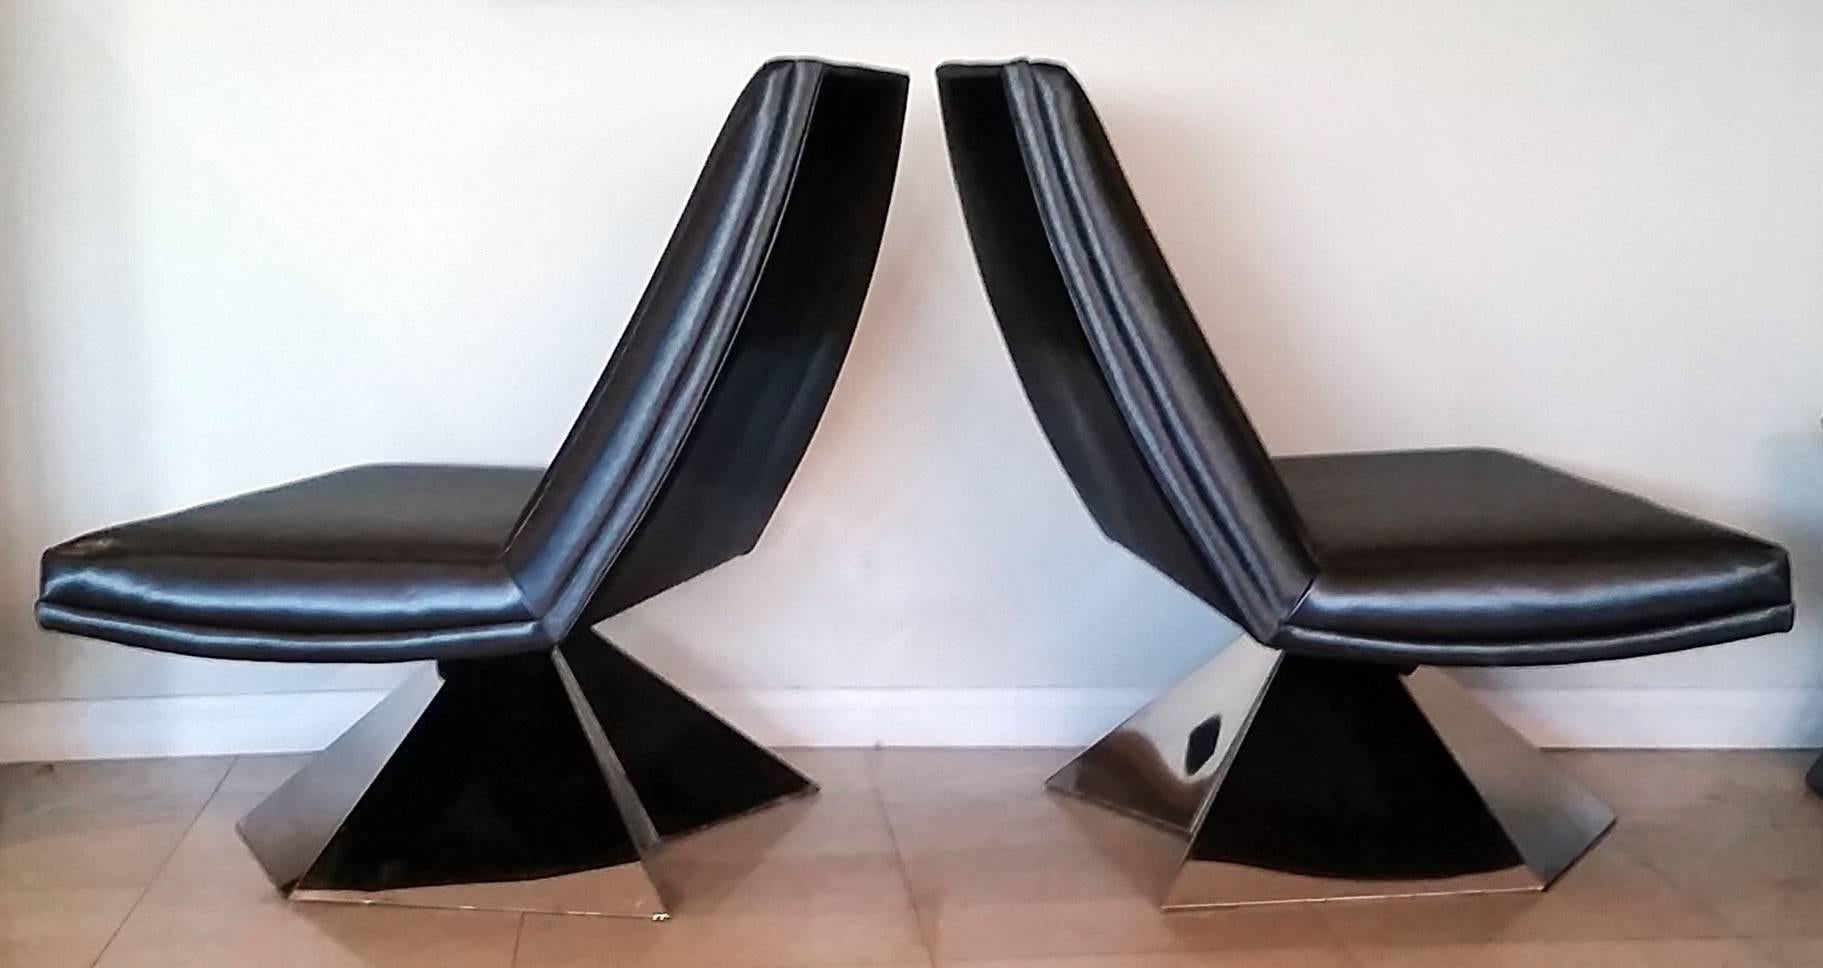 A stunning pair of 1970s lounge chairs. These large chairs sit atop molded chrome bases and are very Space Age modern. For scale purposes, the chairs have been photographed opposite of an Eames compact sofa.

The chairs are upholstered in a